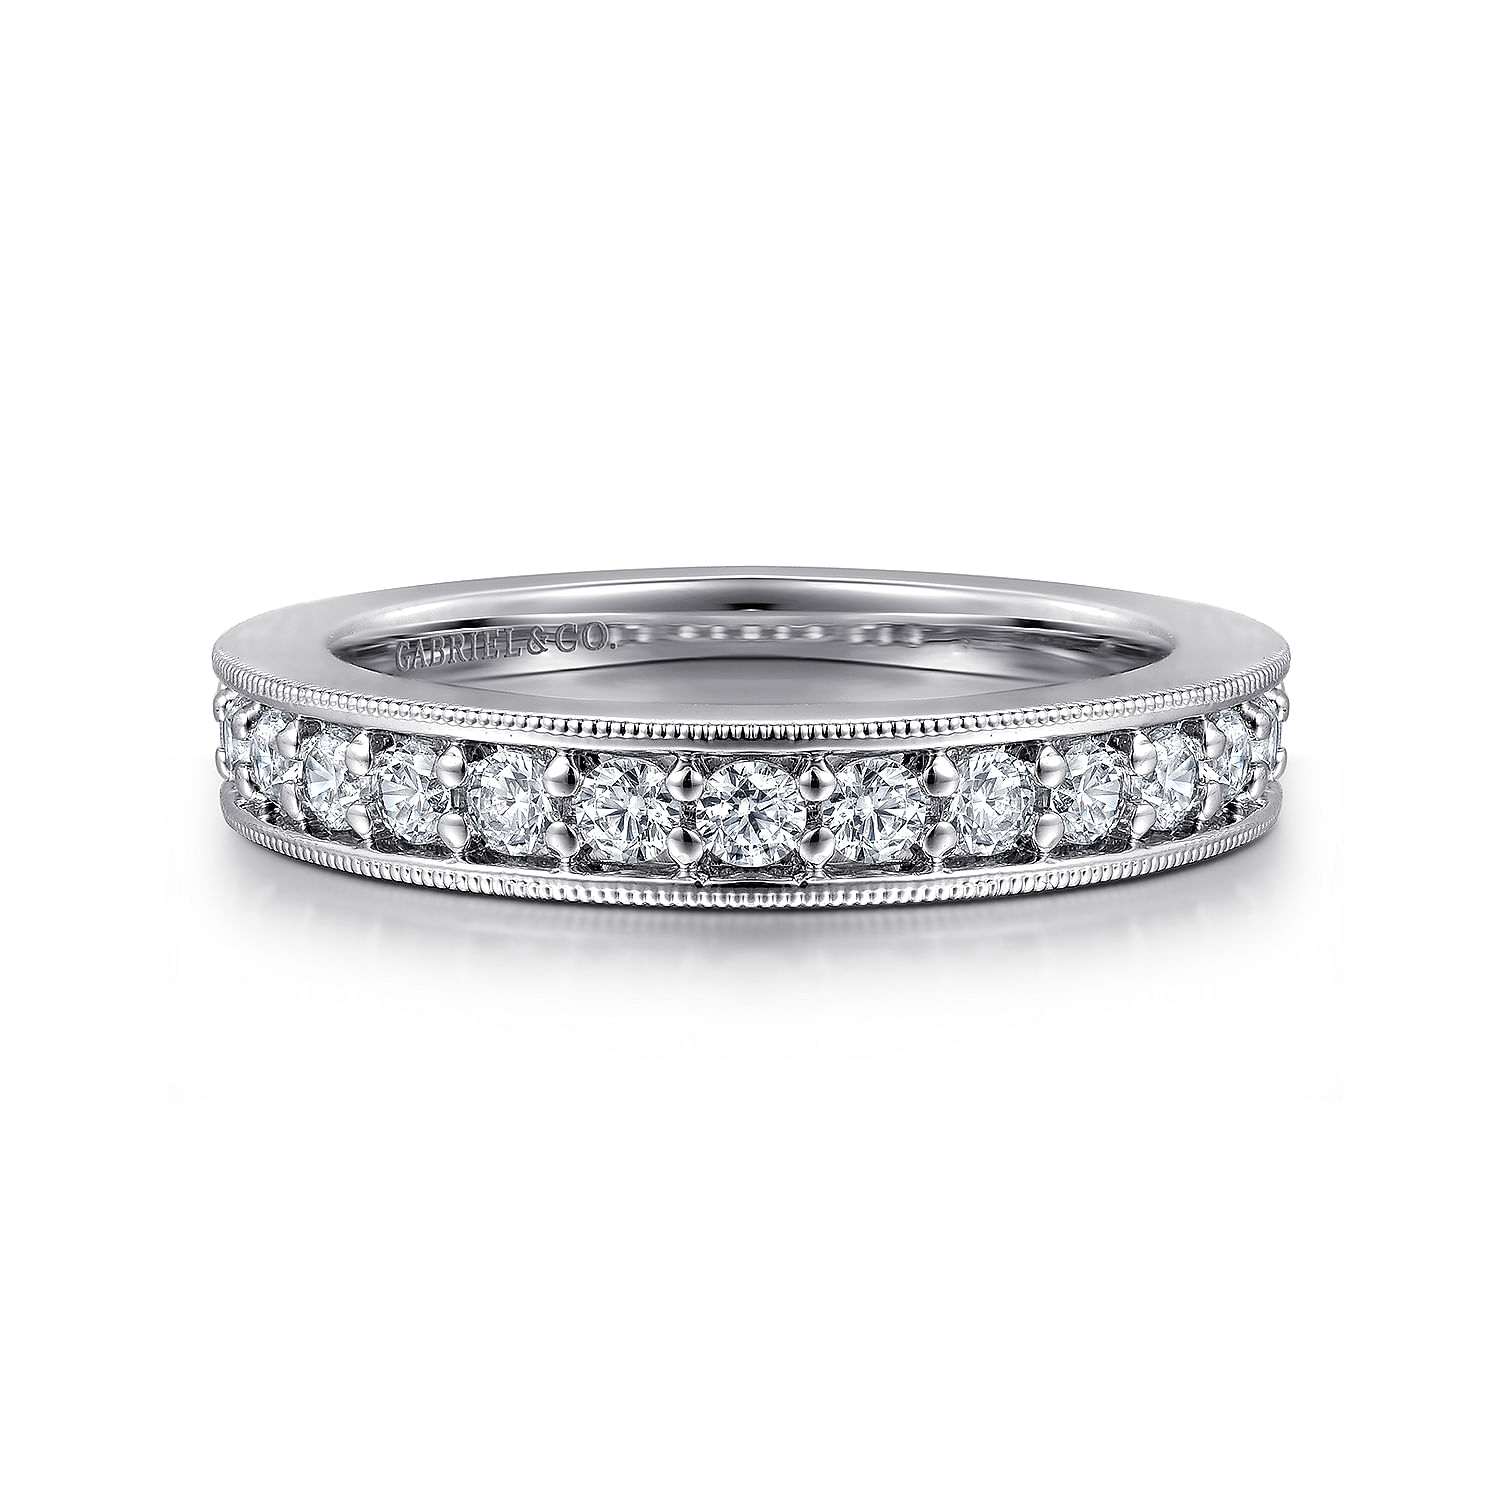 Calabria - 14K White Gold Channel Prong Diamond Anniversary Band with Millgrain